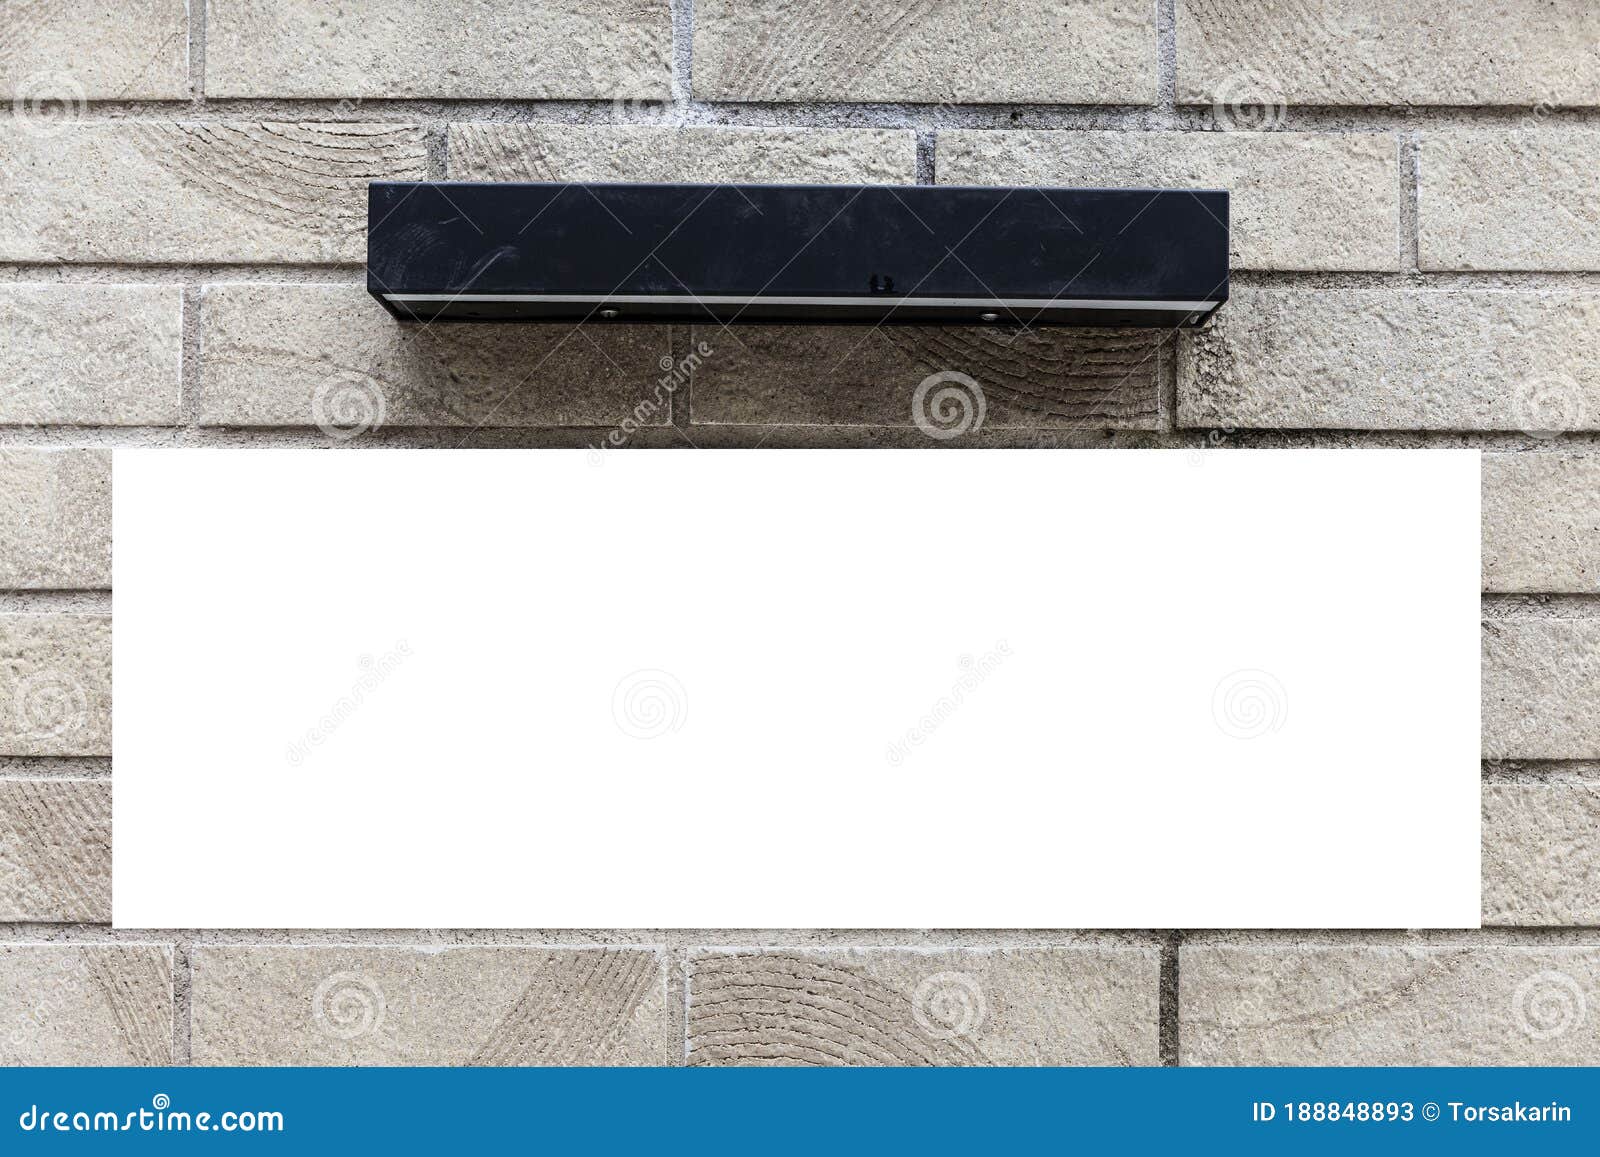 1 231 Blank Name Plate Photos Free Royalty Free Stock Photos From Dreamstime